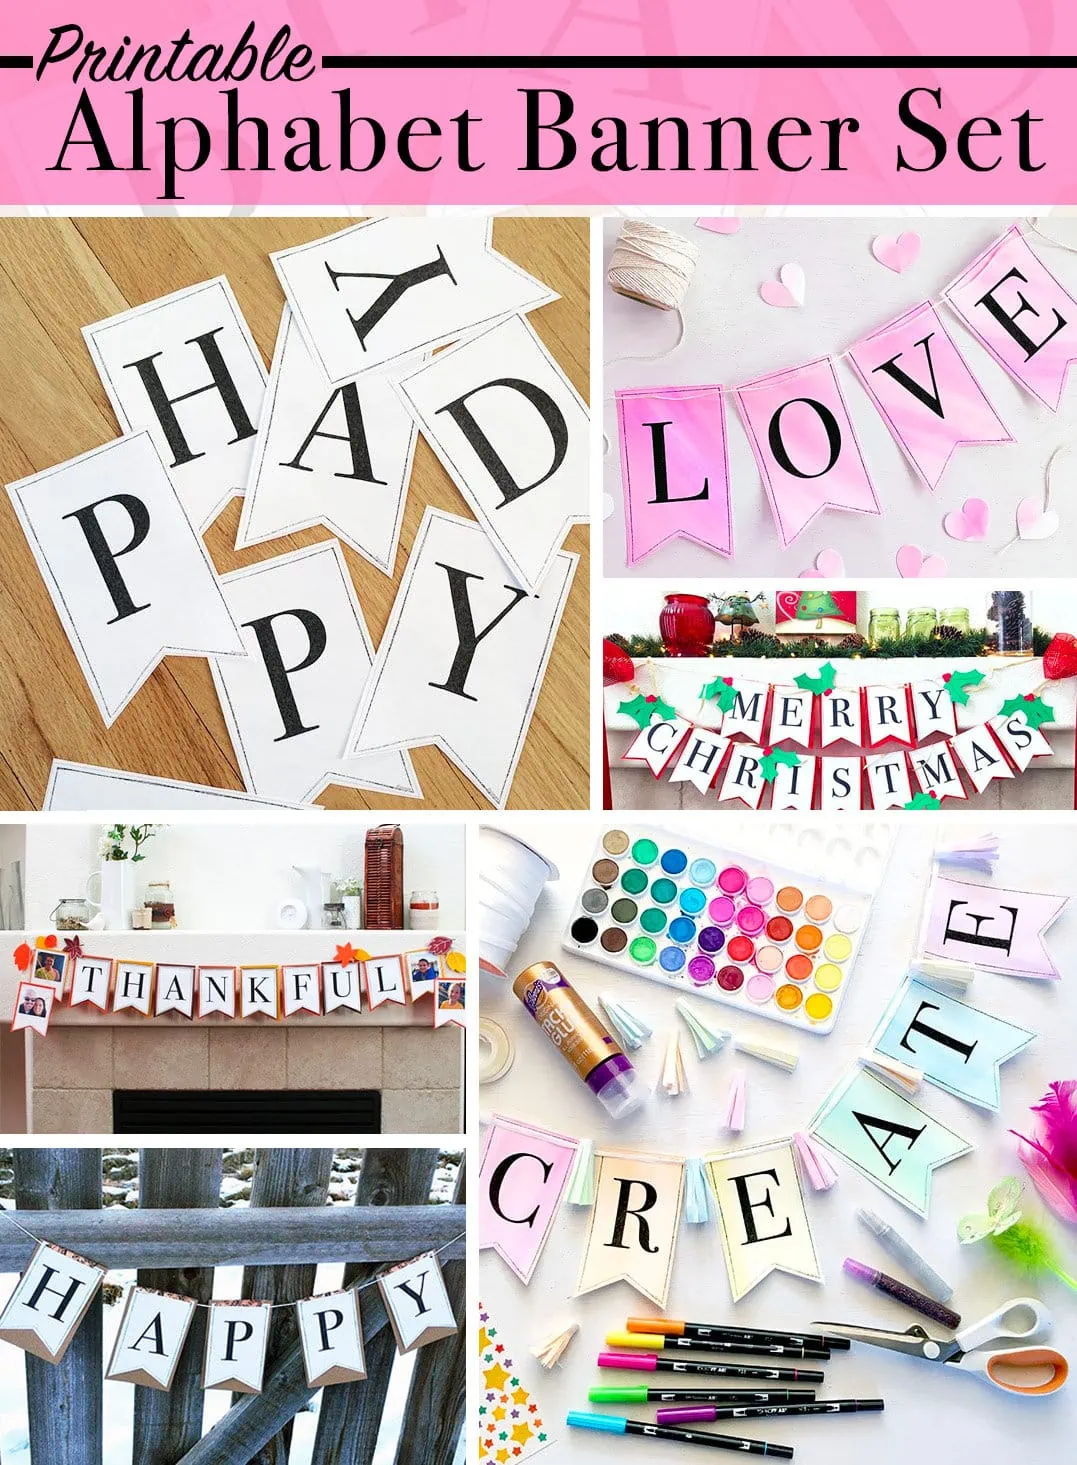 Alphabet banner set - make your own party banners - designed by Jen Goode